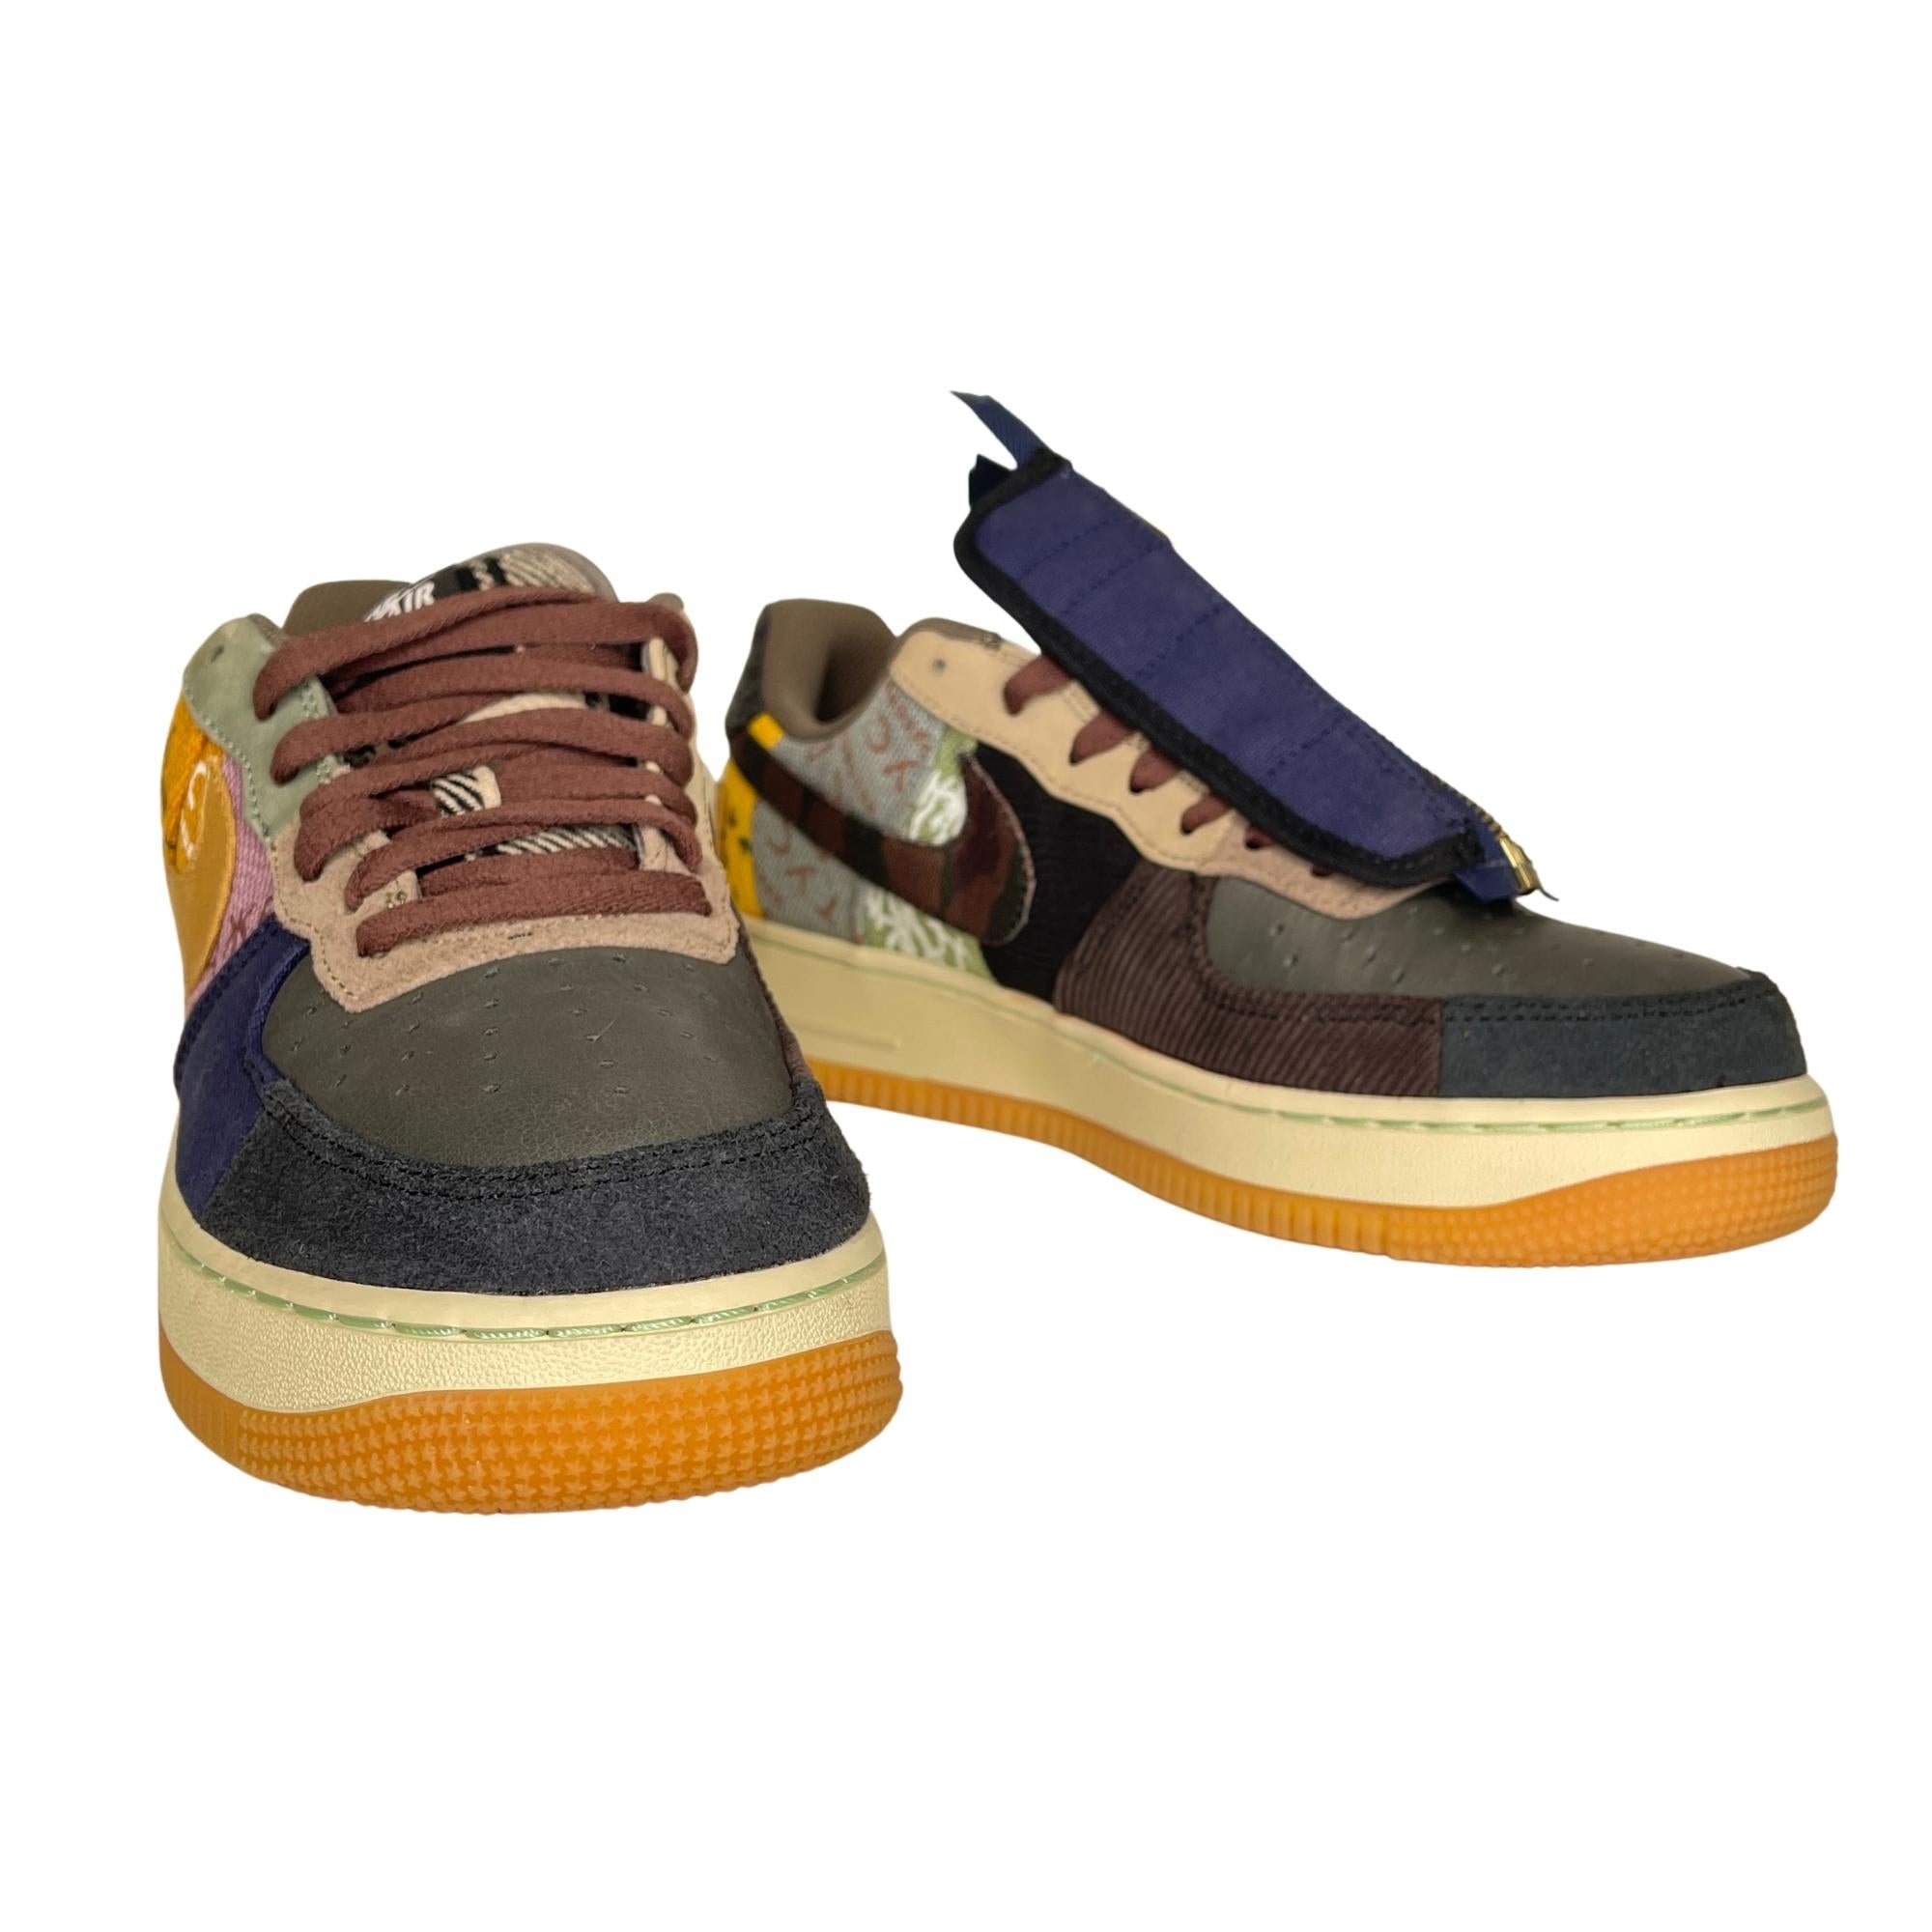 The Travis Scott x Air Force 1 Low 'Cactus Jack' is a unique creation featuring the rapper's trademark utilitarian cues. Released in November 2019, this edition has printed canvas, leather and suede uppers with zipped corduroy lace shrouds and